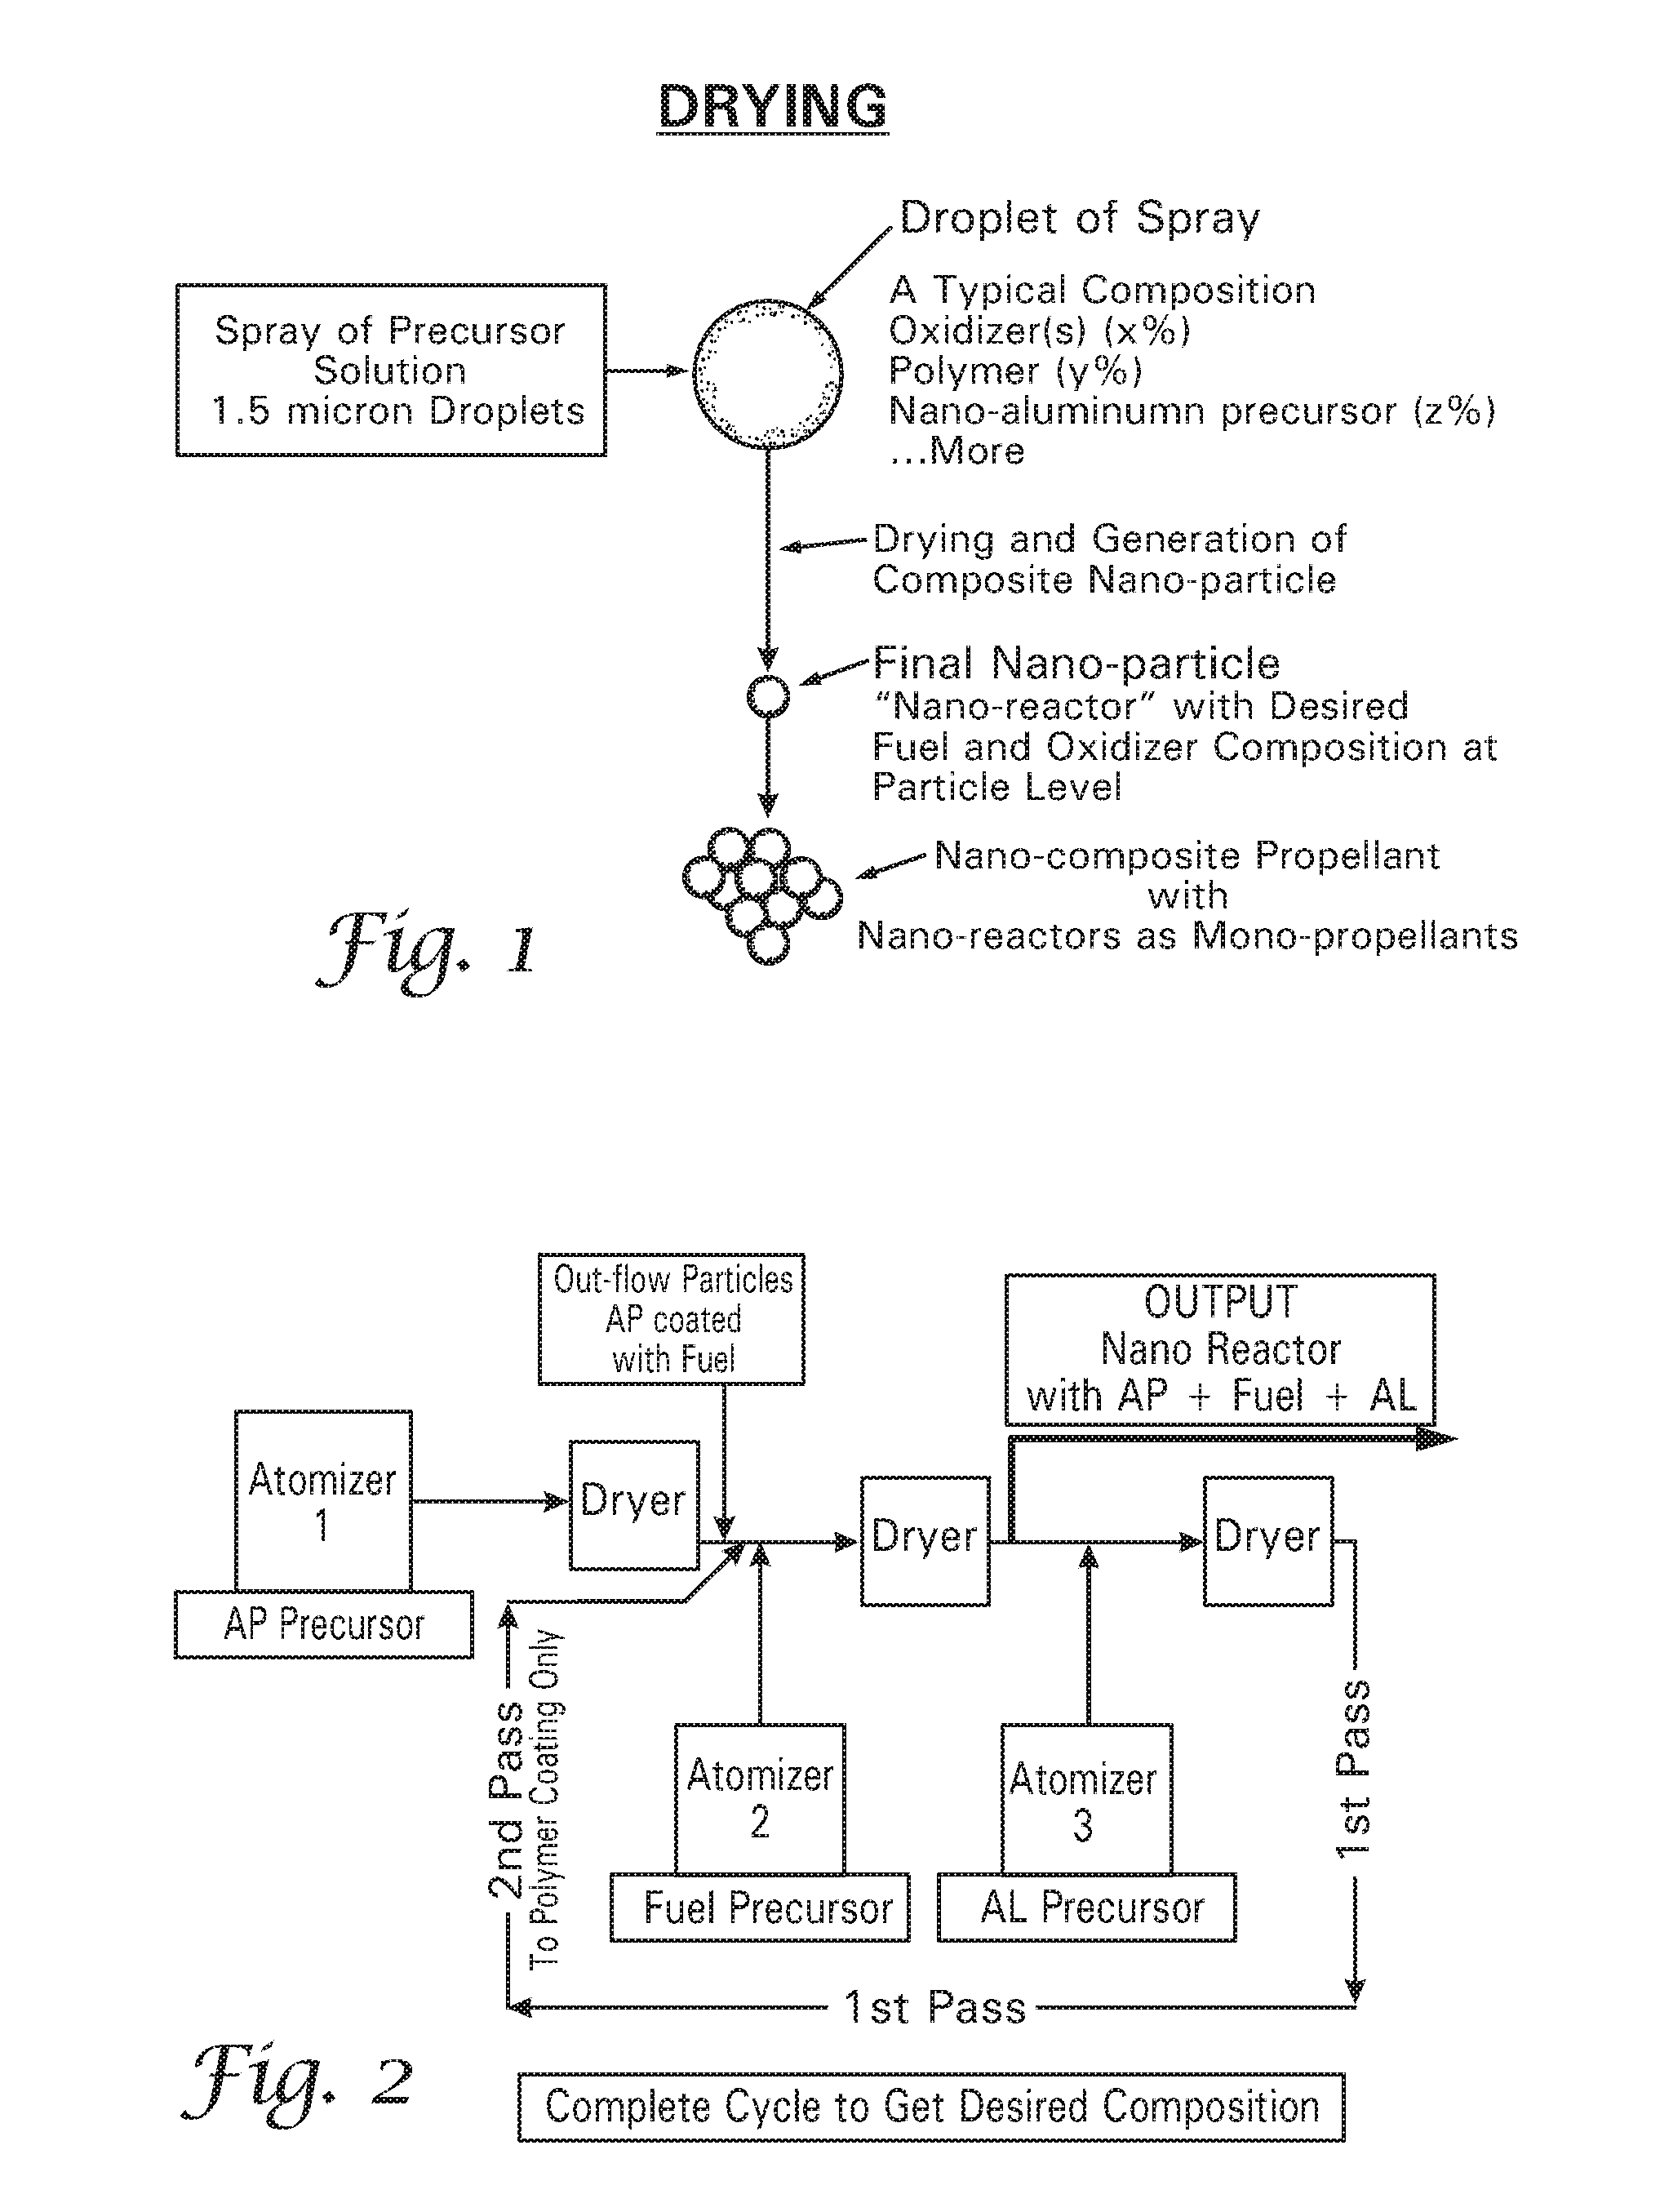 Propellants and high energy materials compositions containing nano-scale oxidizer and other components